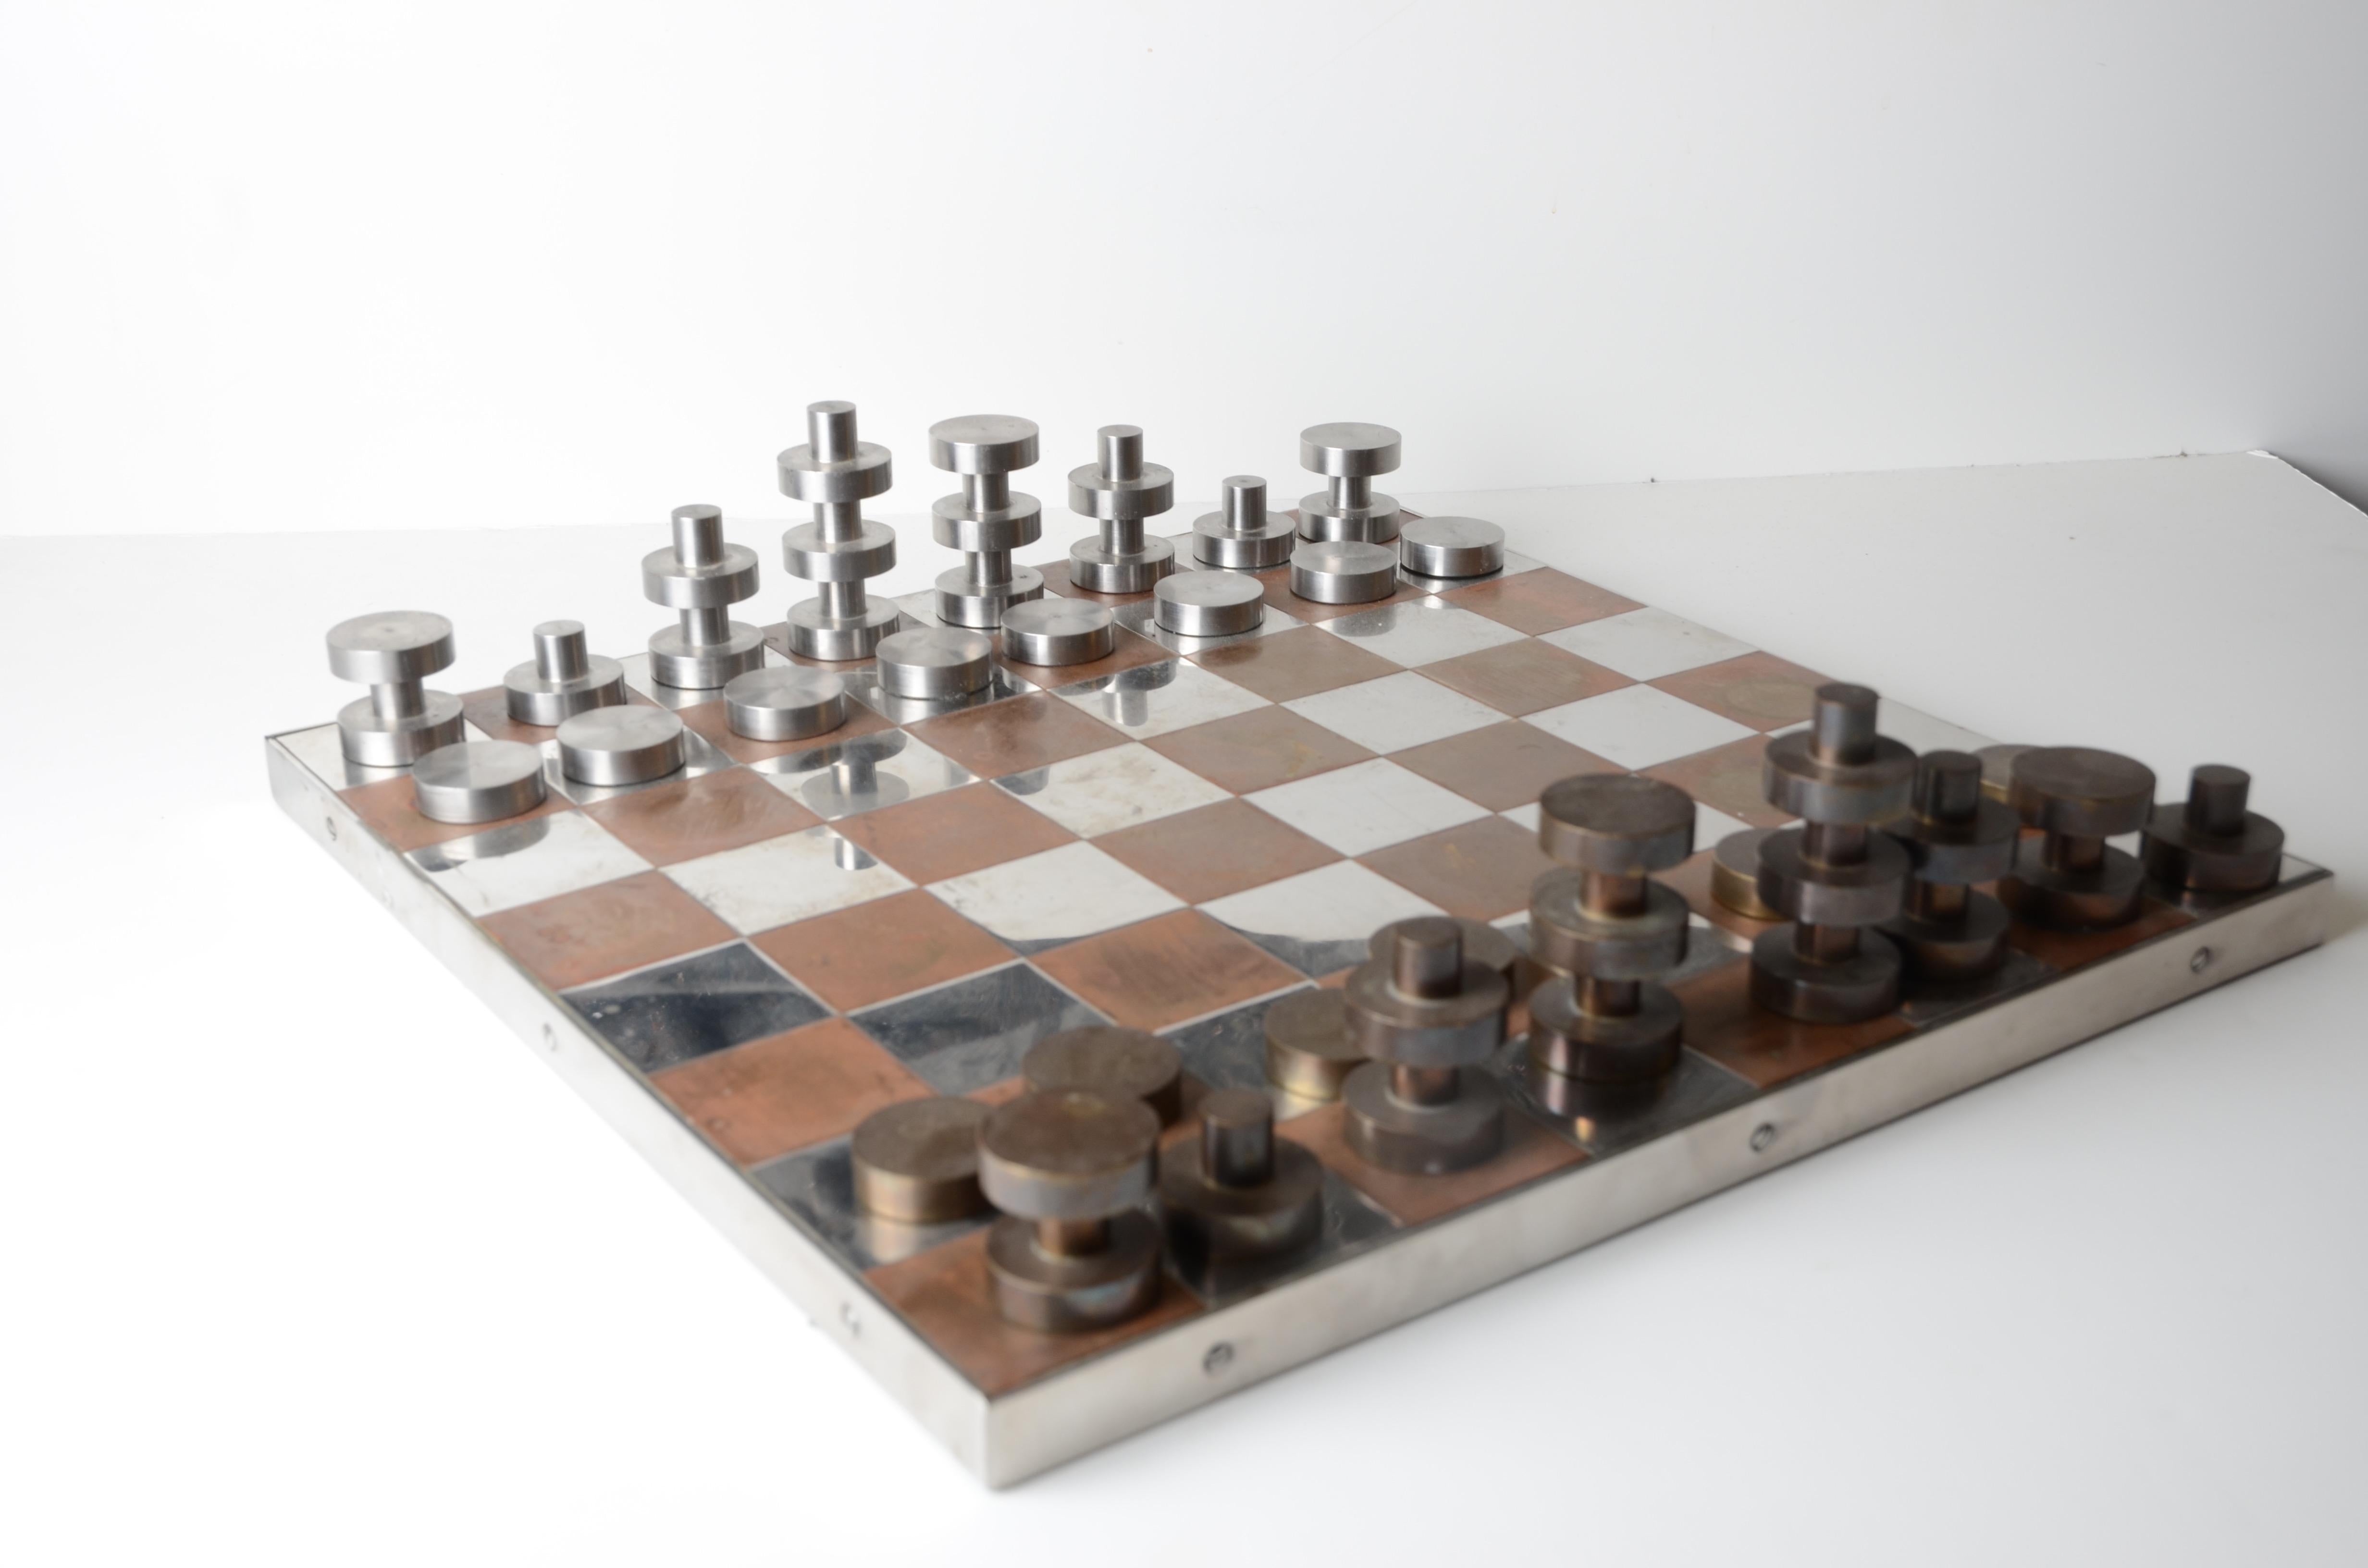 A chess set in brass and stainless steel, designed by Jacob Asbaek. Denmark, 1970s.